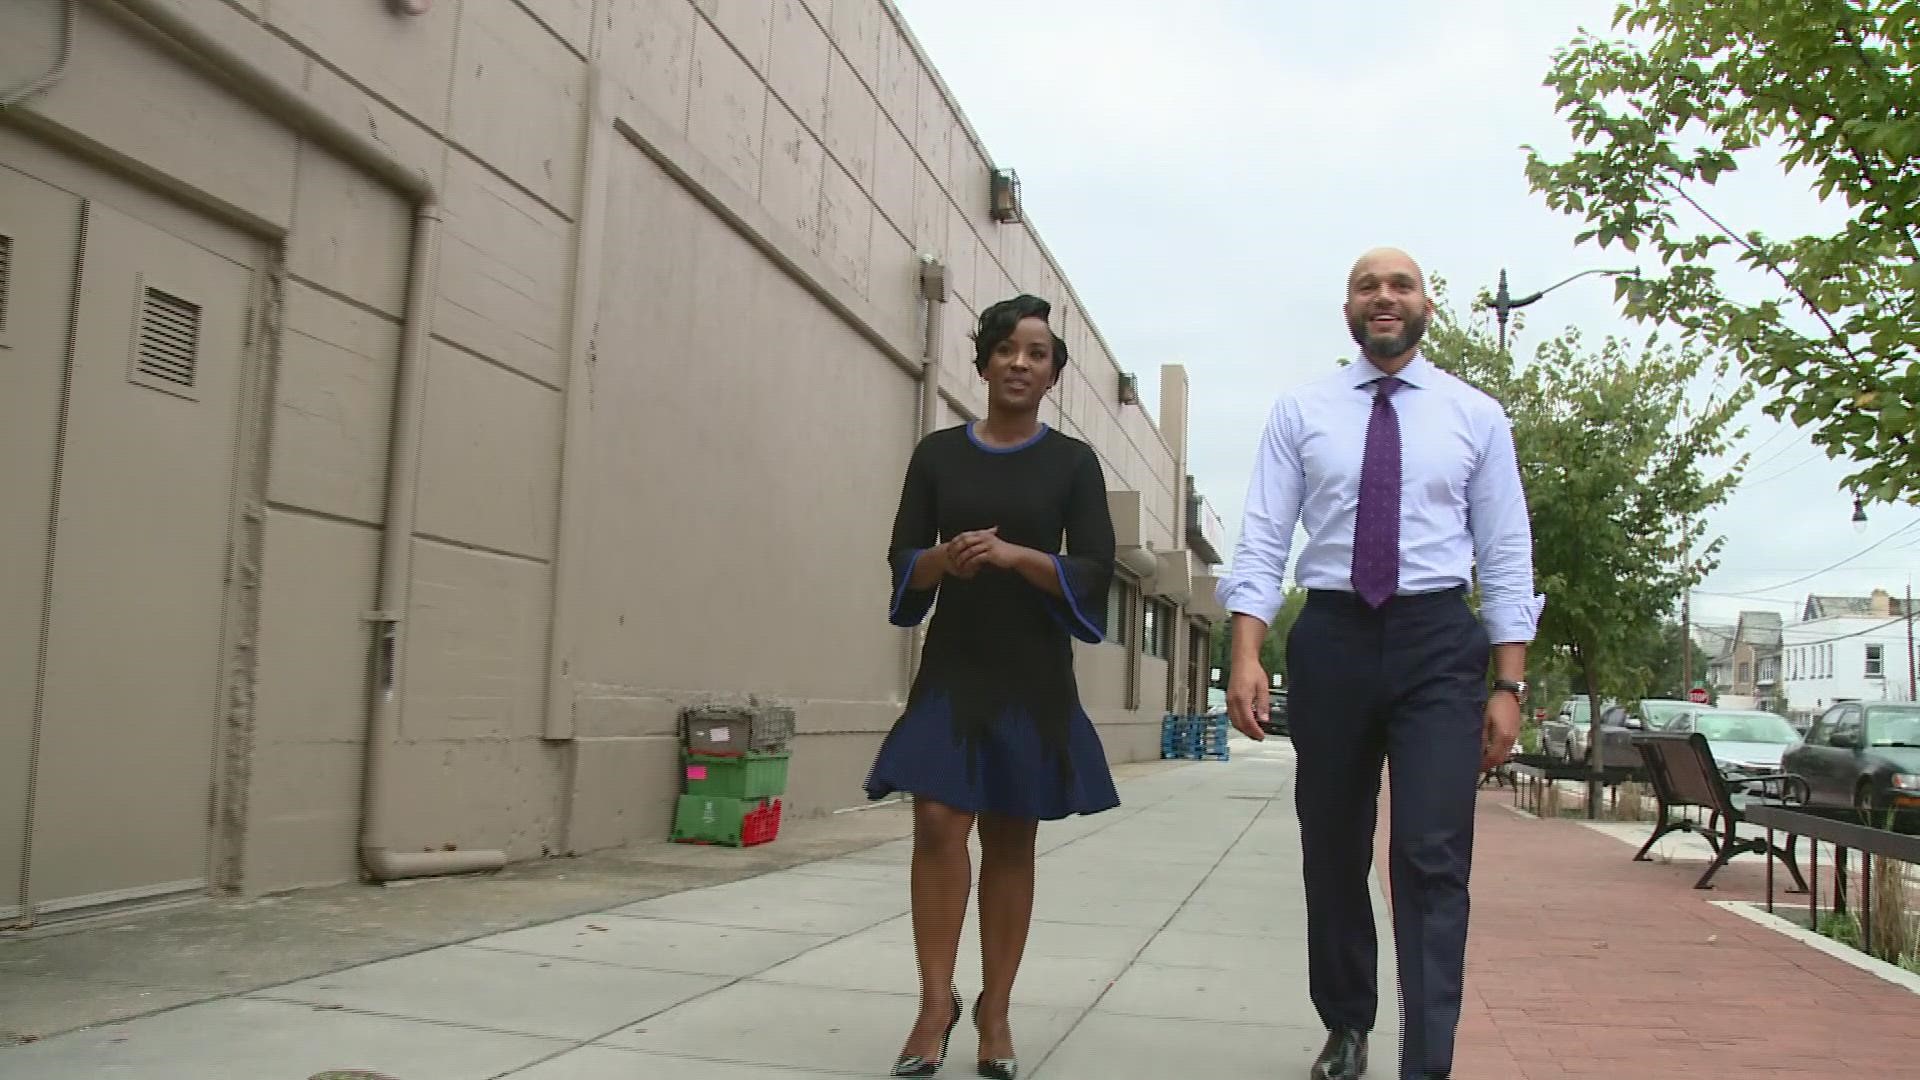 According to the Office of Campaign Finance, White and two others filed to begin raising campaign funds. Mayor Bowser has not announced whether she'll run again.